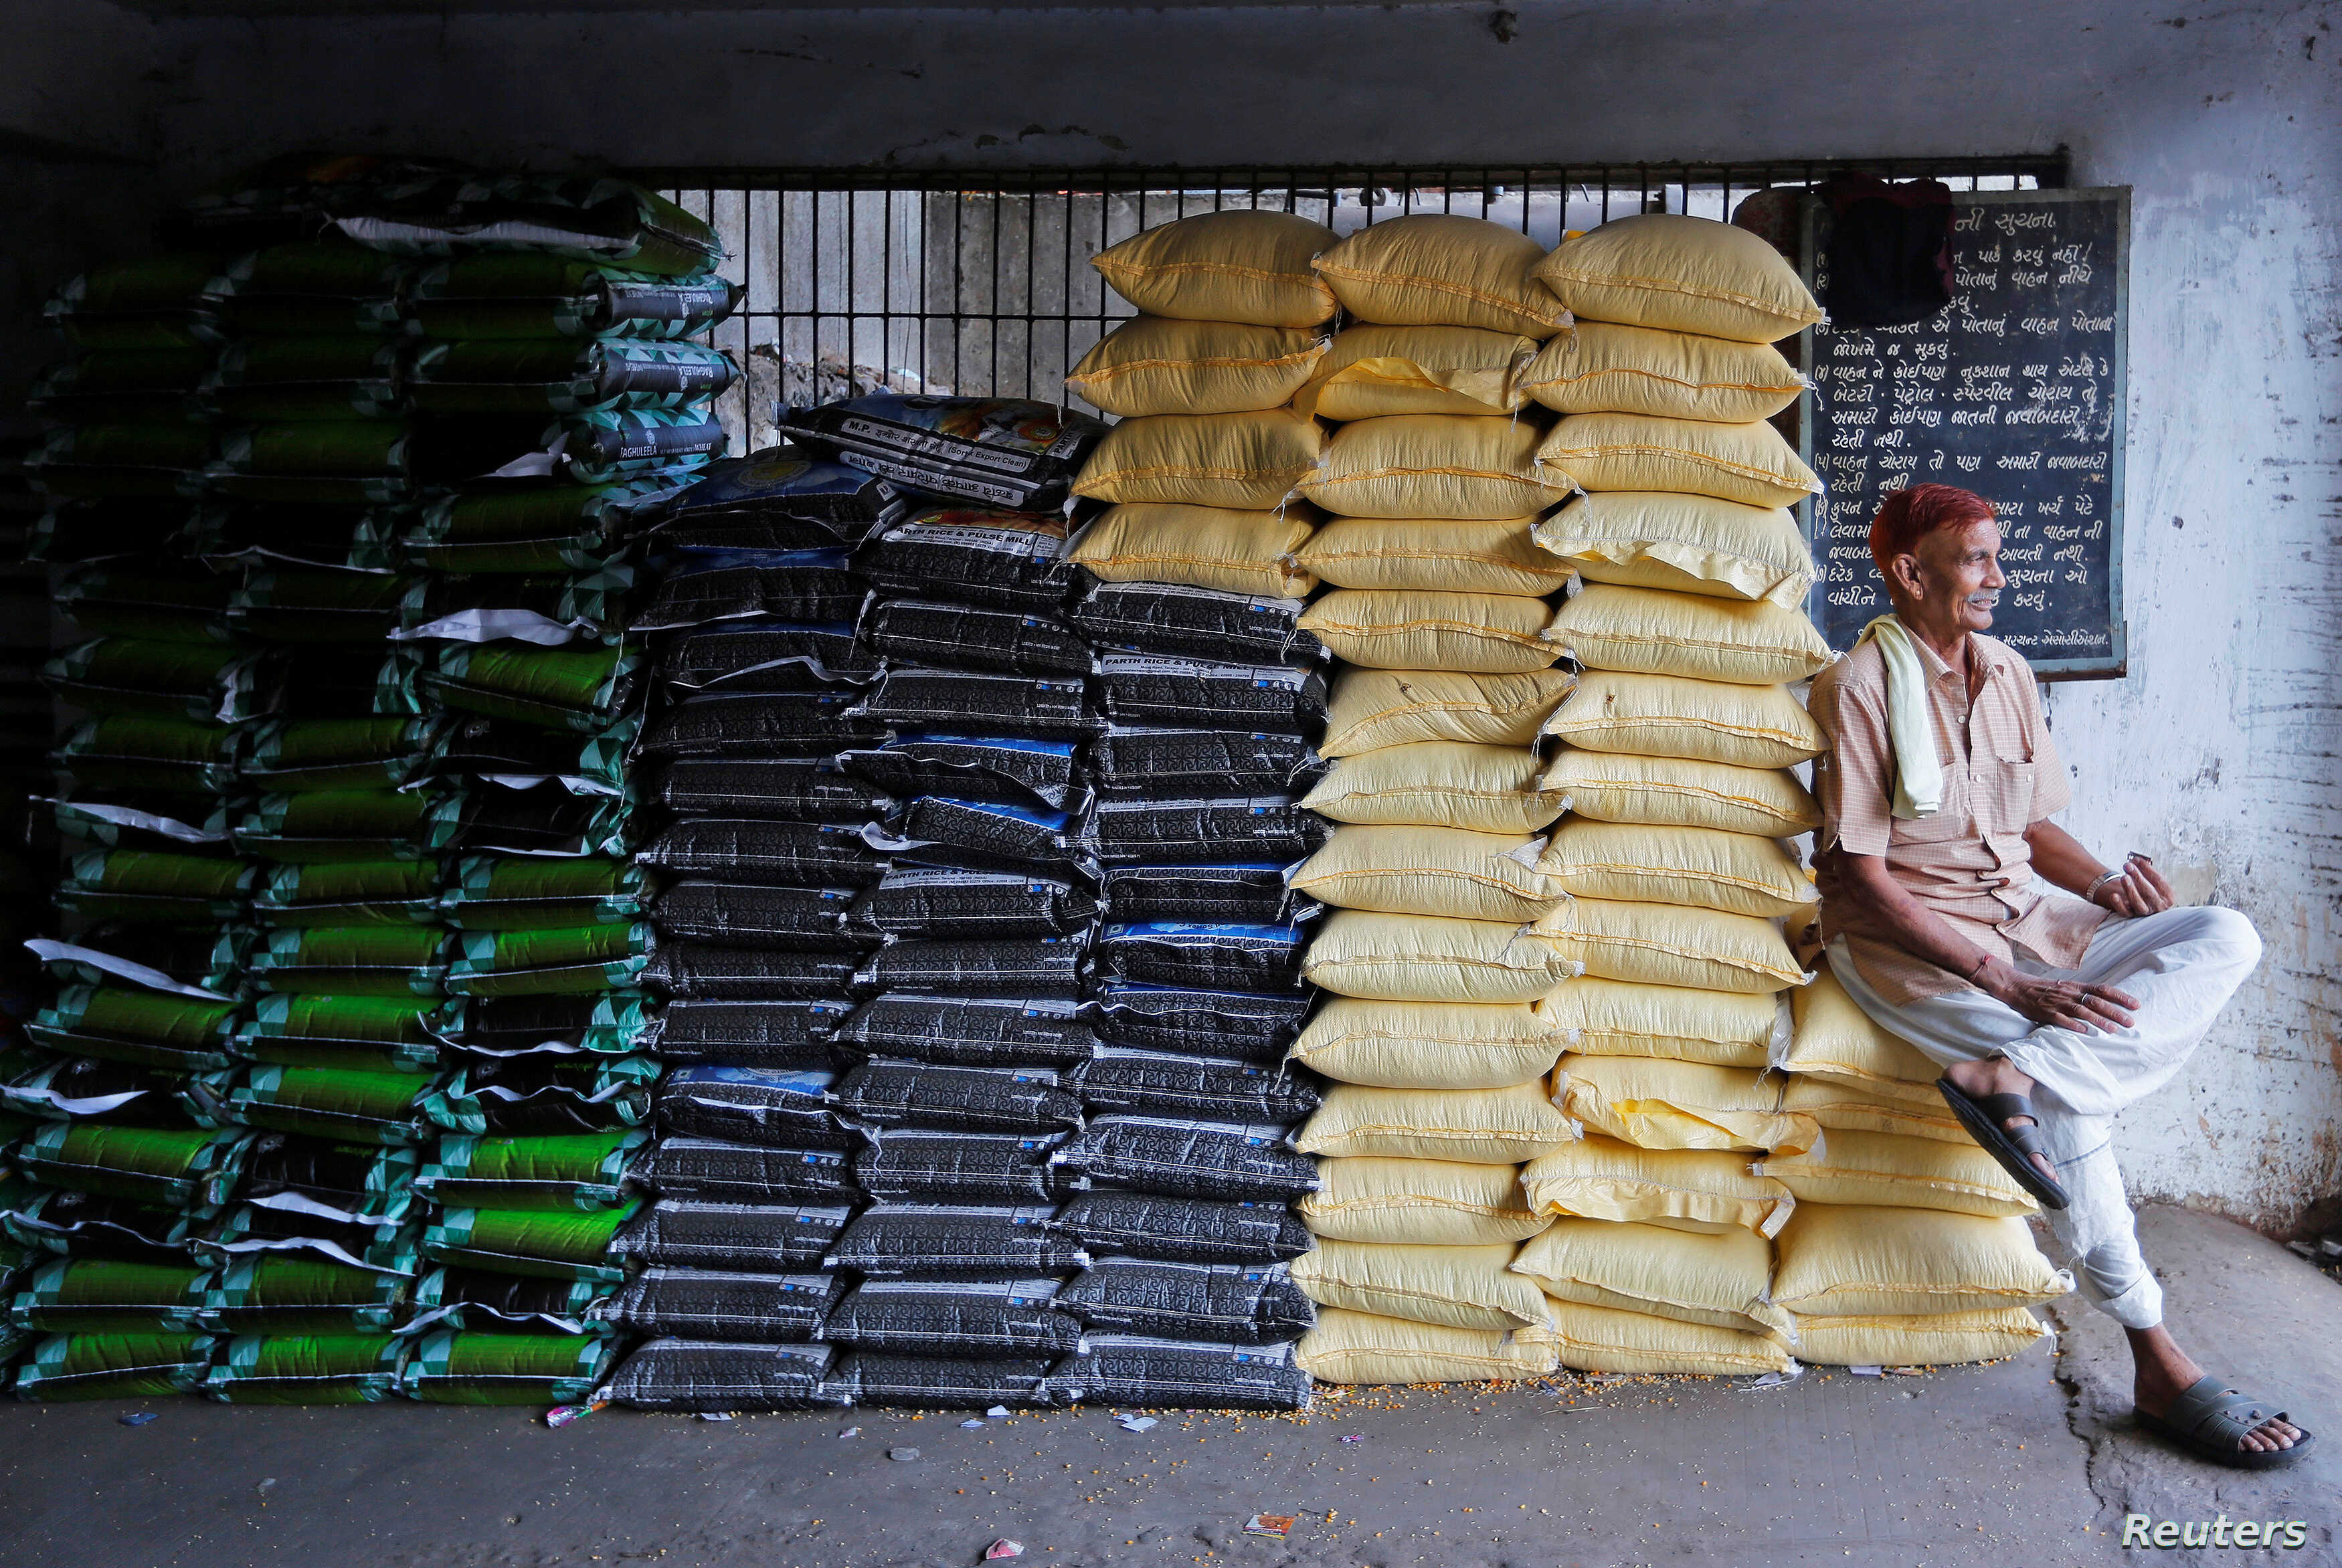 A labourer sits on sacks of food grains while waiting for customers at a wholesale market in Ahmedabad, India, December 14, 2016. REUTERS/Amit Dave - RTX2UXYK